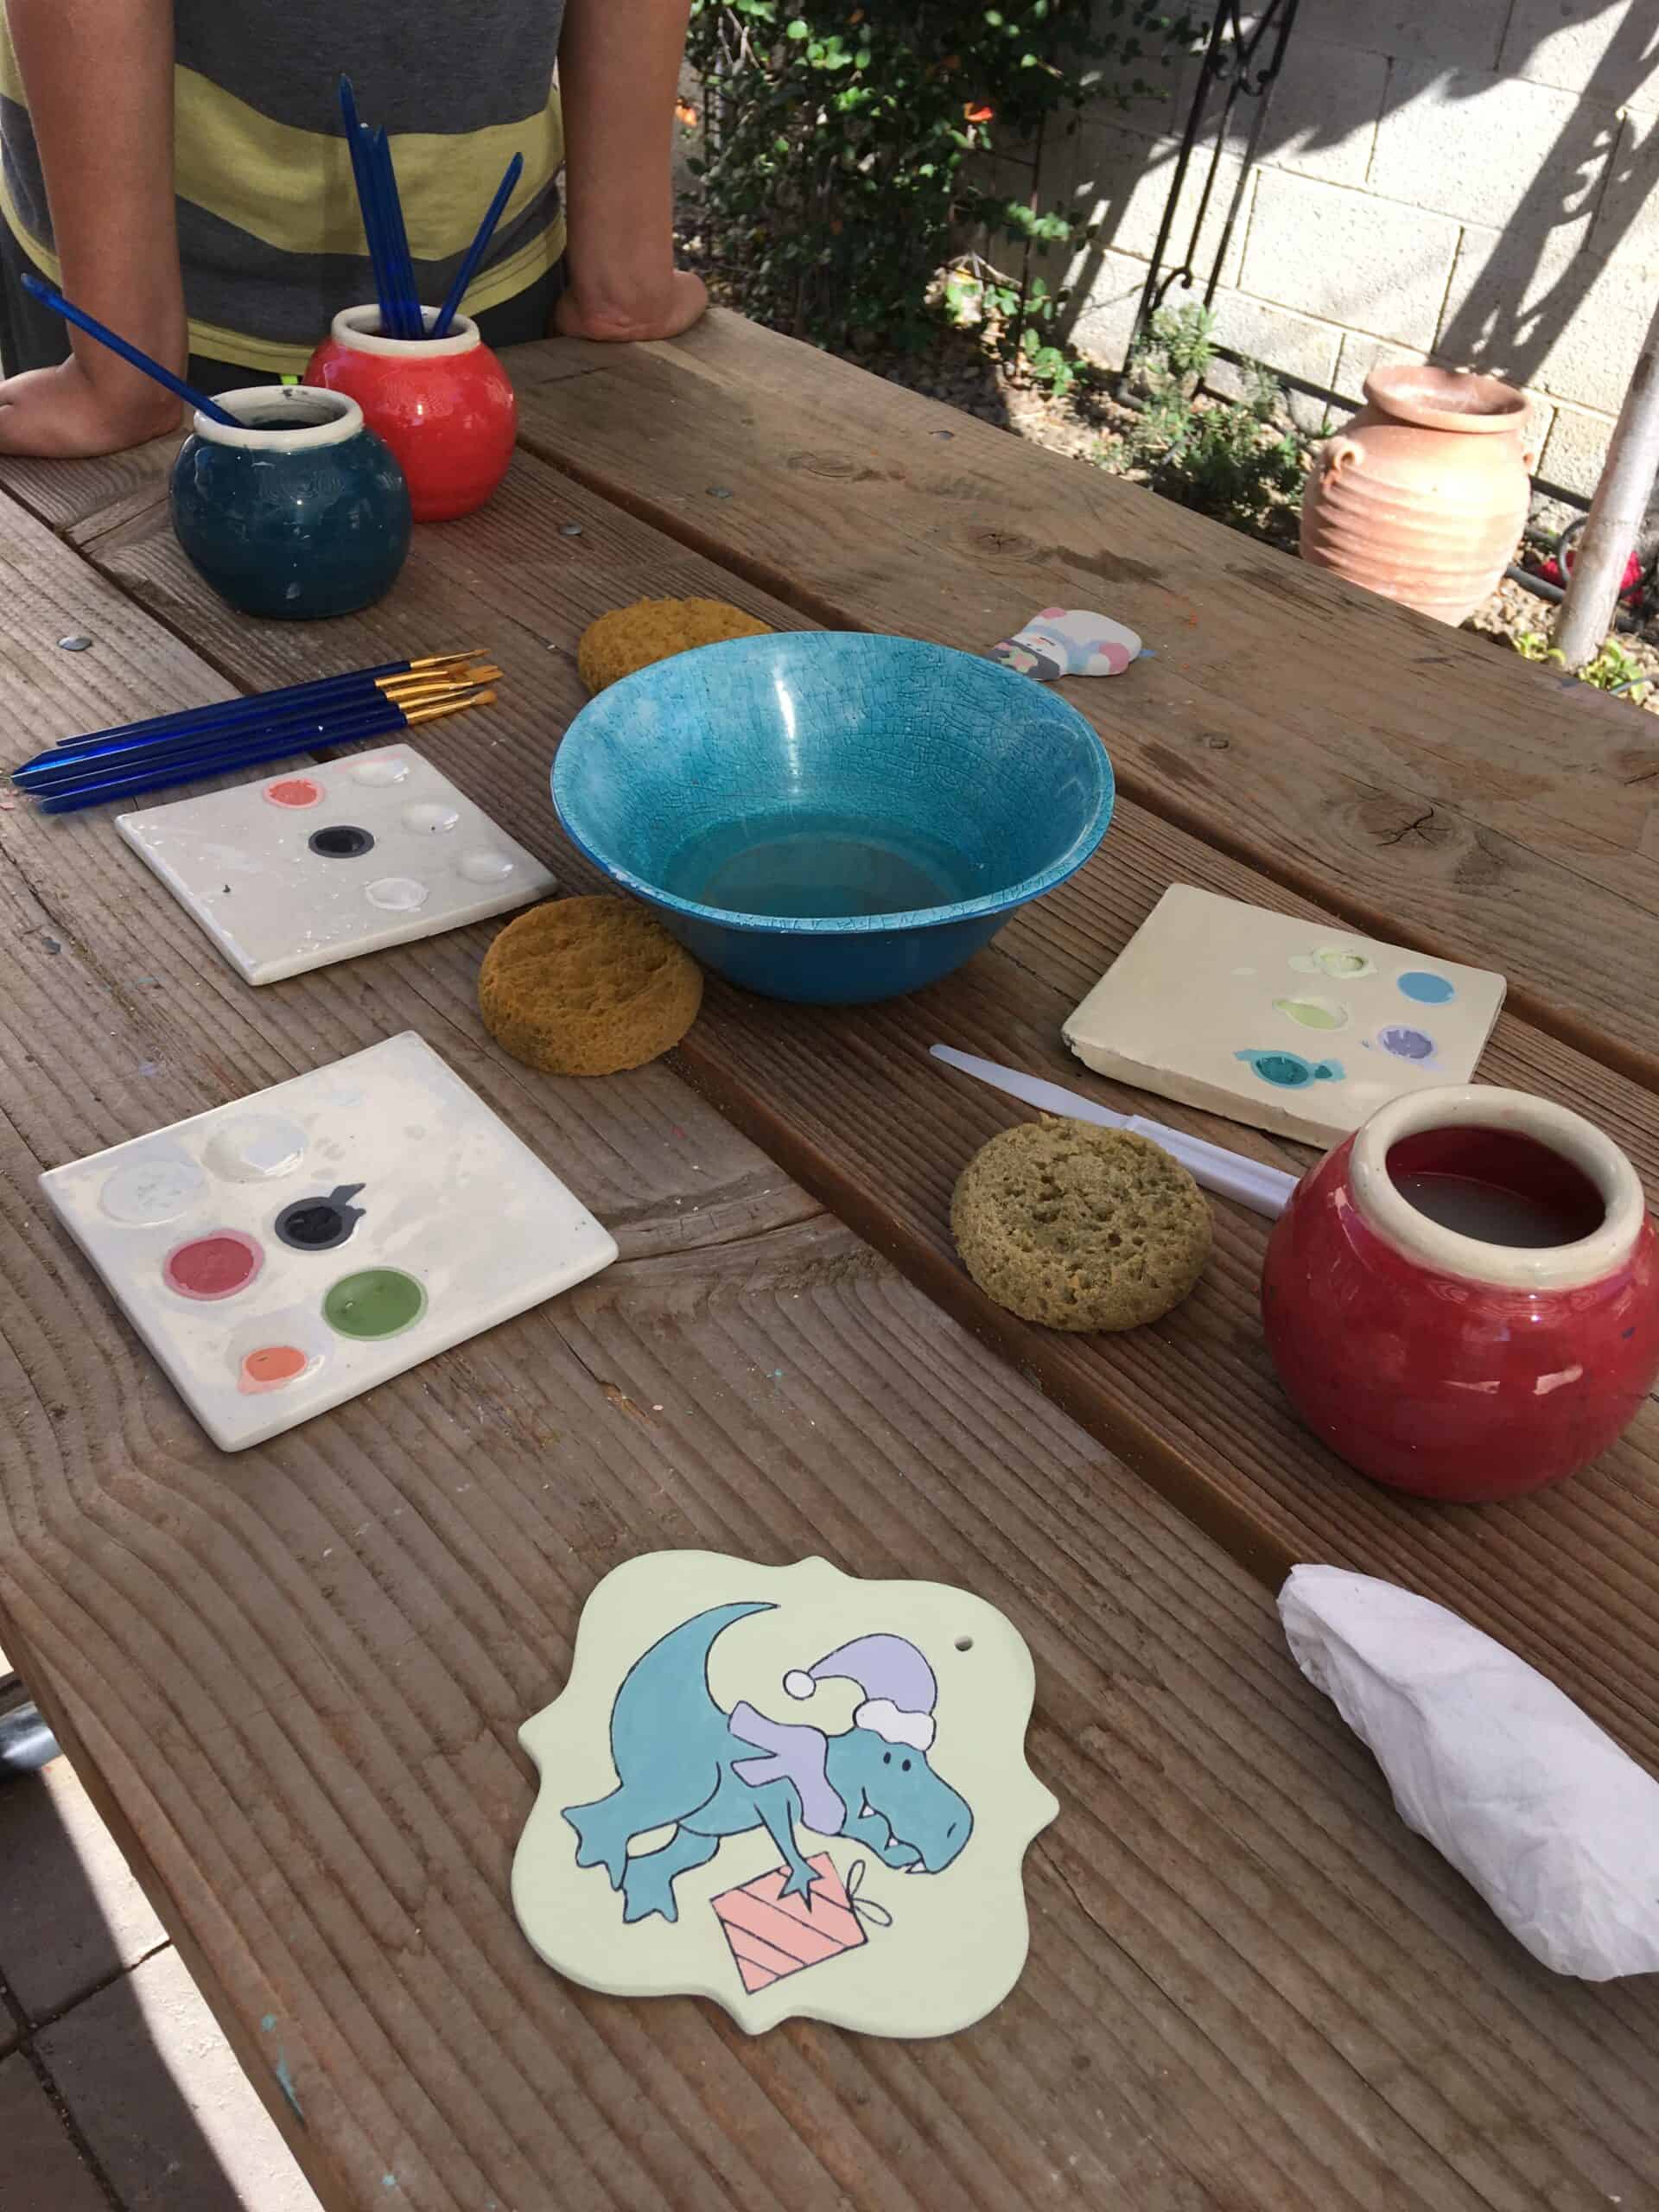 photo of tools to paint pottery on a table